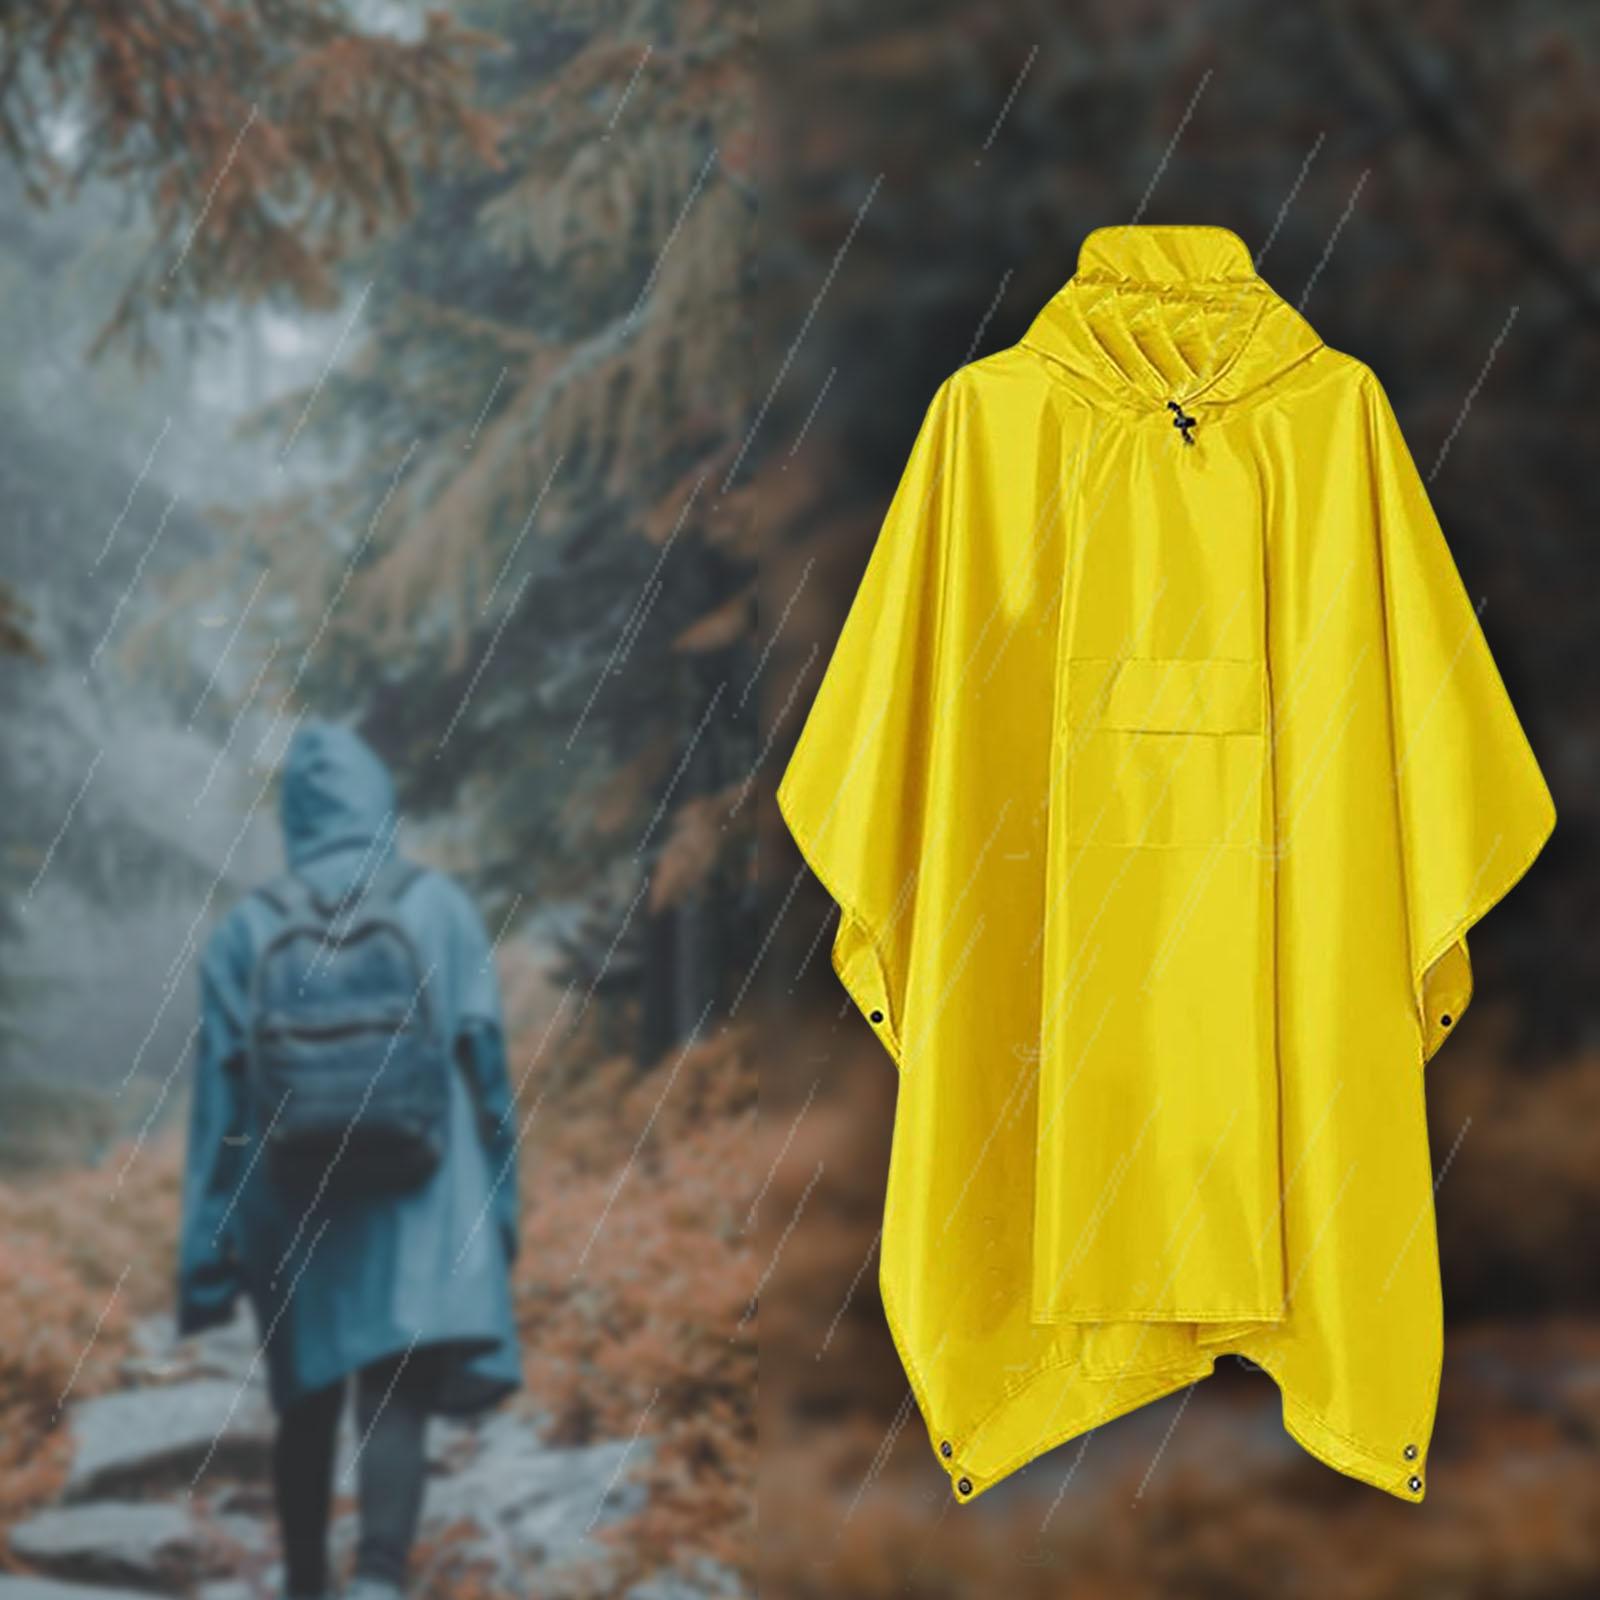 Wet Weather Rain Poncho with Pocket Reusable Adult Emergency Outdoor Yellow